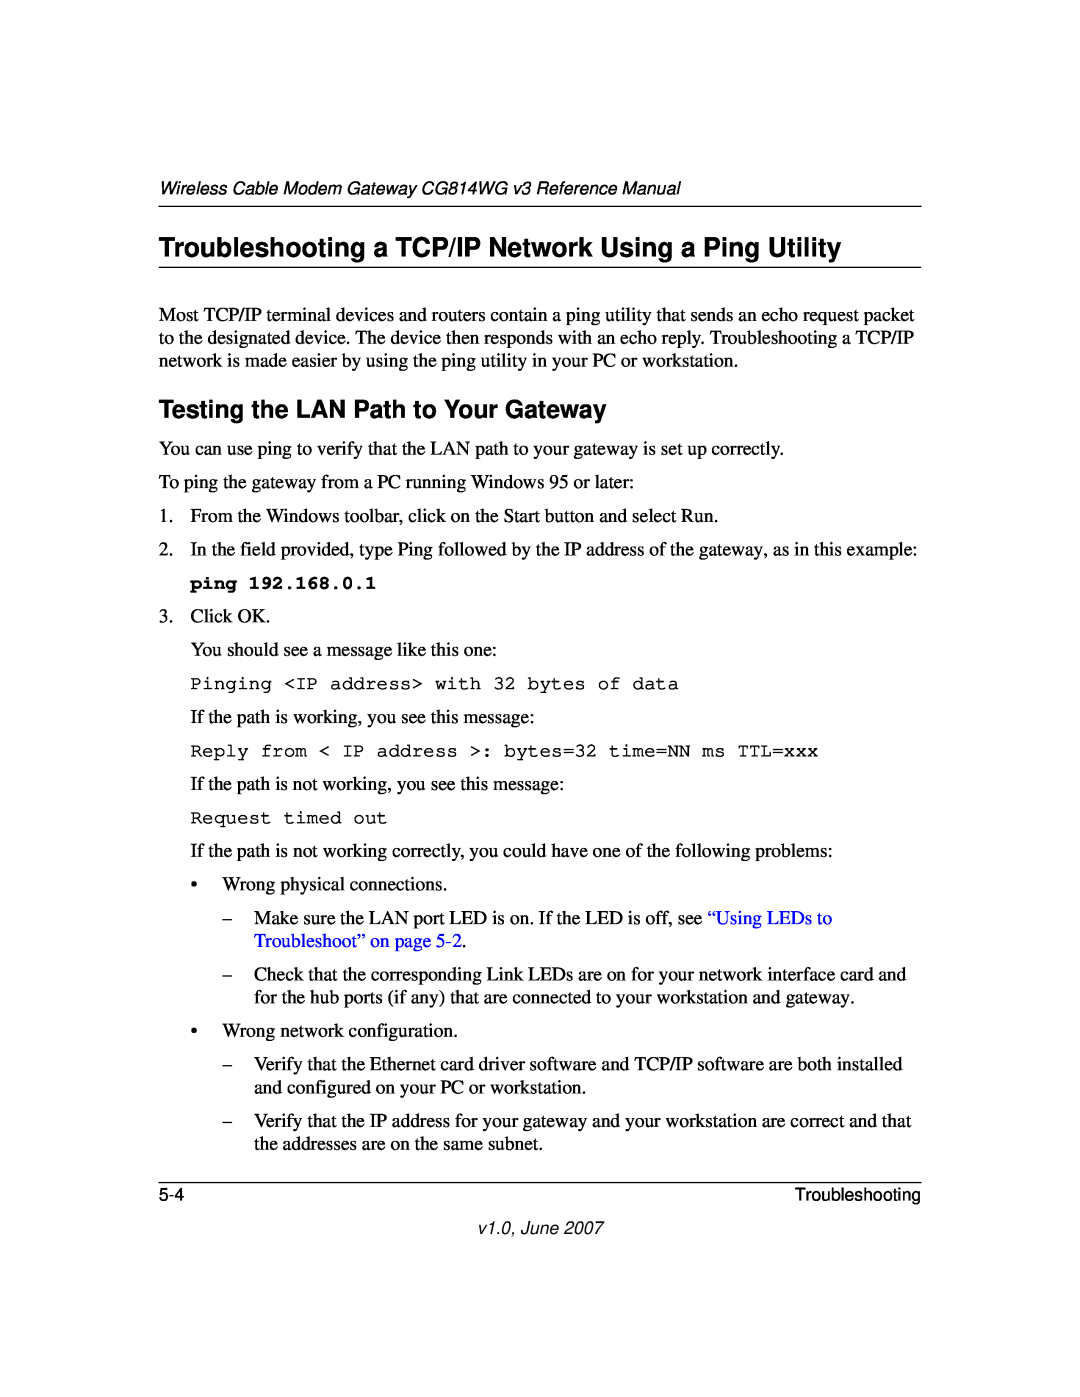 NETGEAR CG814WG V3 manual Troubleshooting a TCP/IP Network Using a Ping Utility, Testing the LAN Path to Your Gateway 